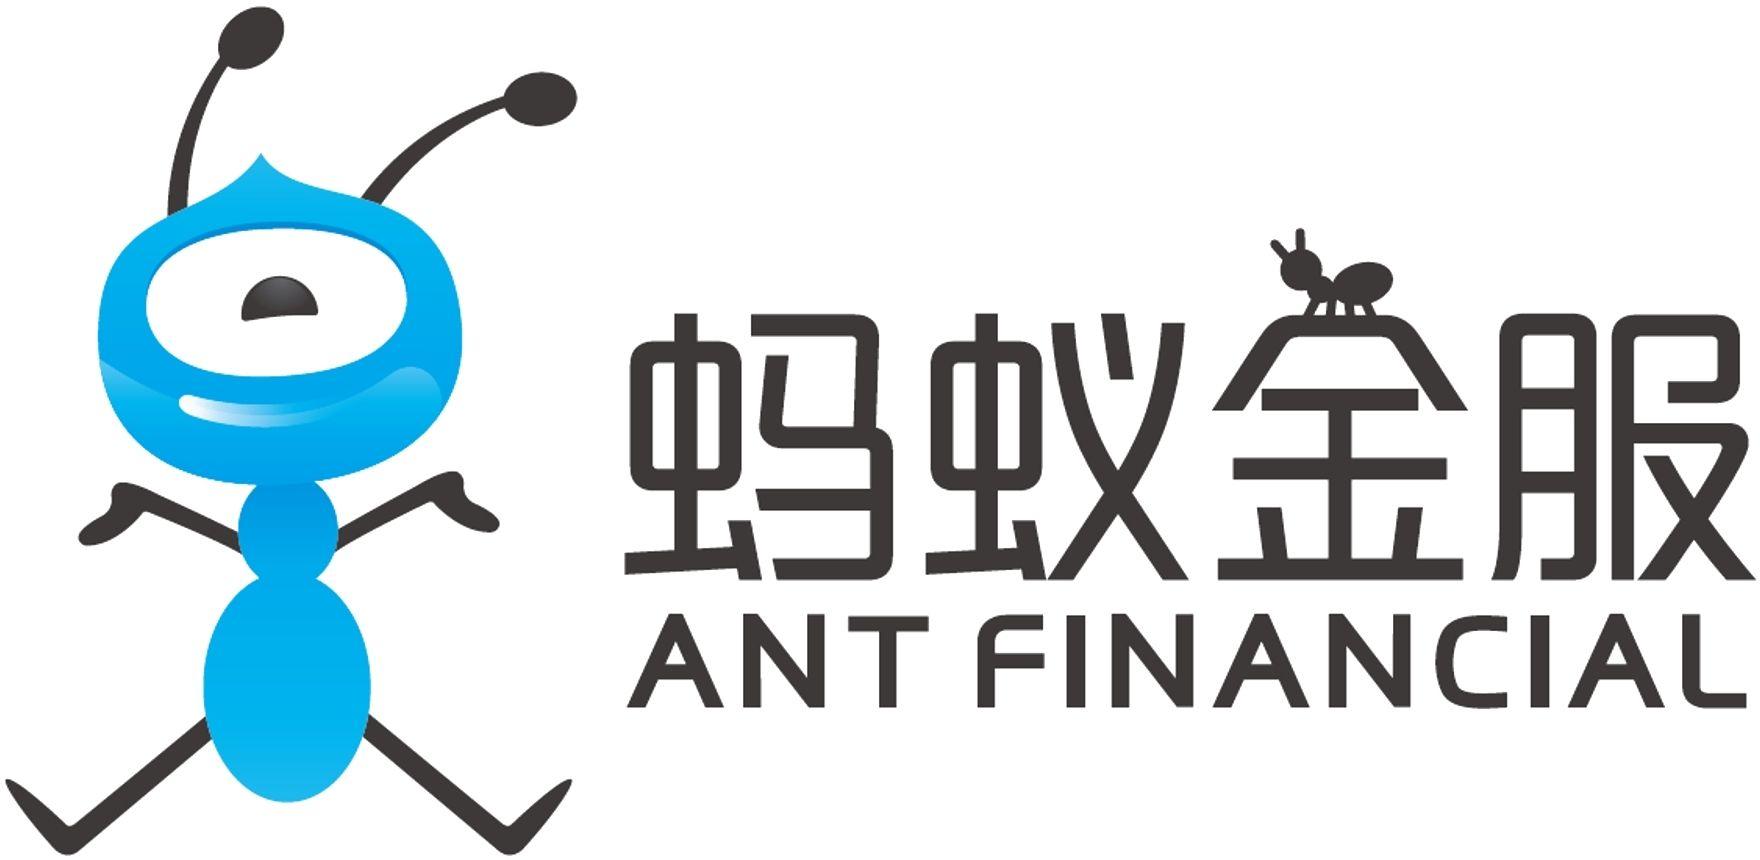 Ant Financial Logo - Alibaba Group Agrees to 33% Equity Stake in Ant Financial. Business